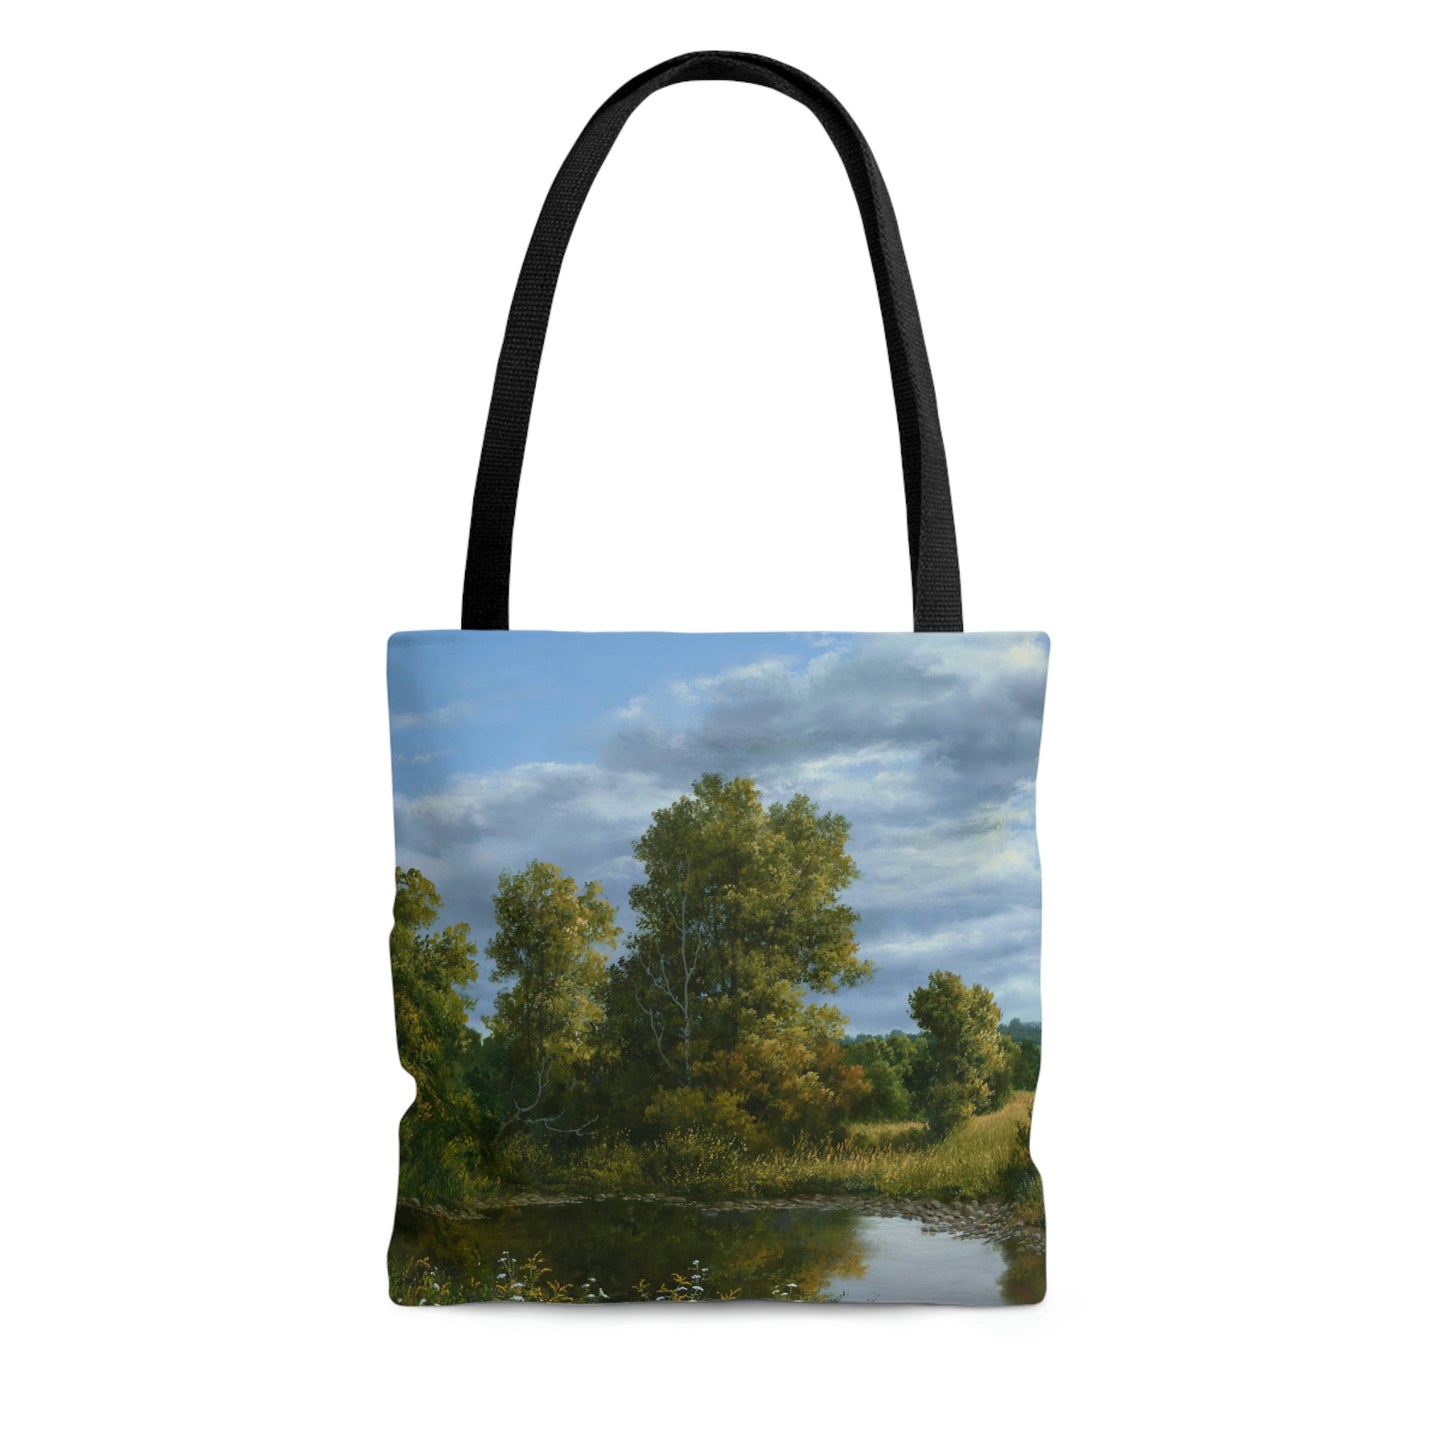 Andrew Orr: "The Pond in Late Summer" - AOP Tote Bag